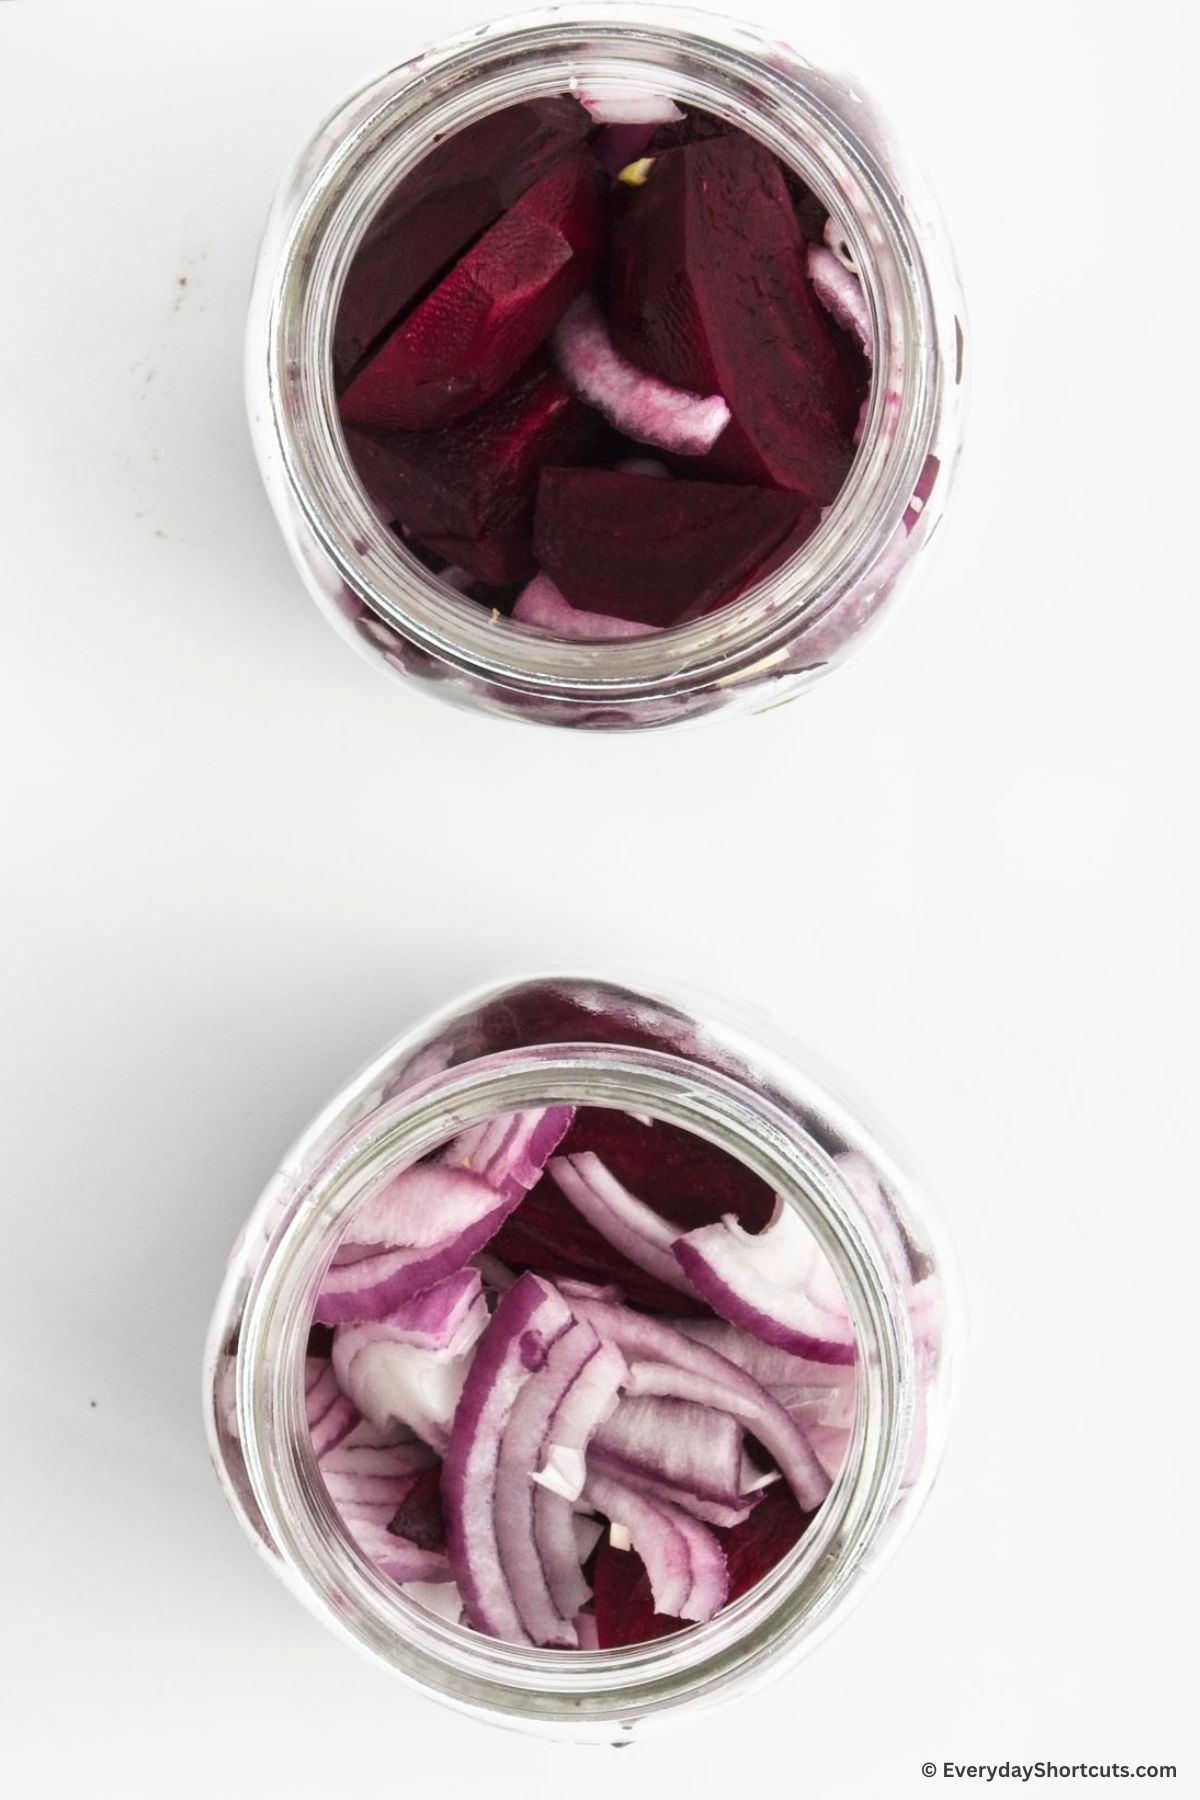 beets and onions in mason jars